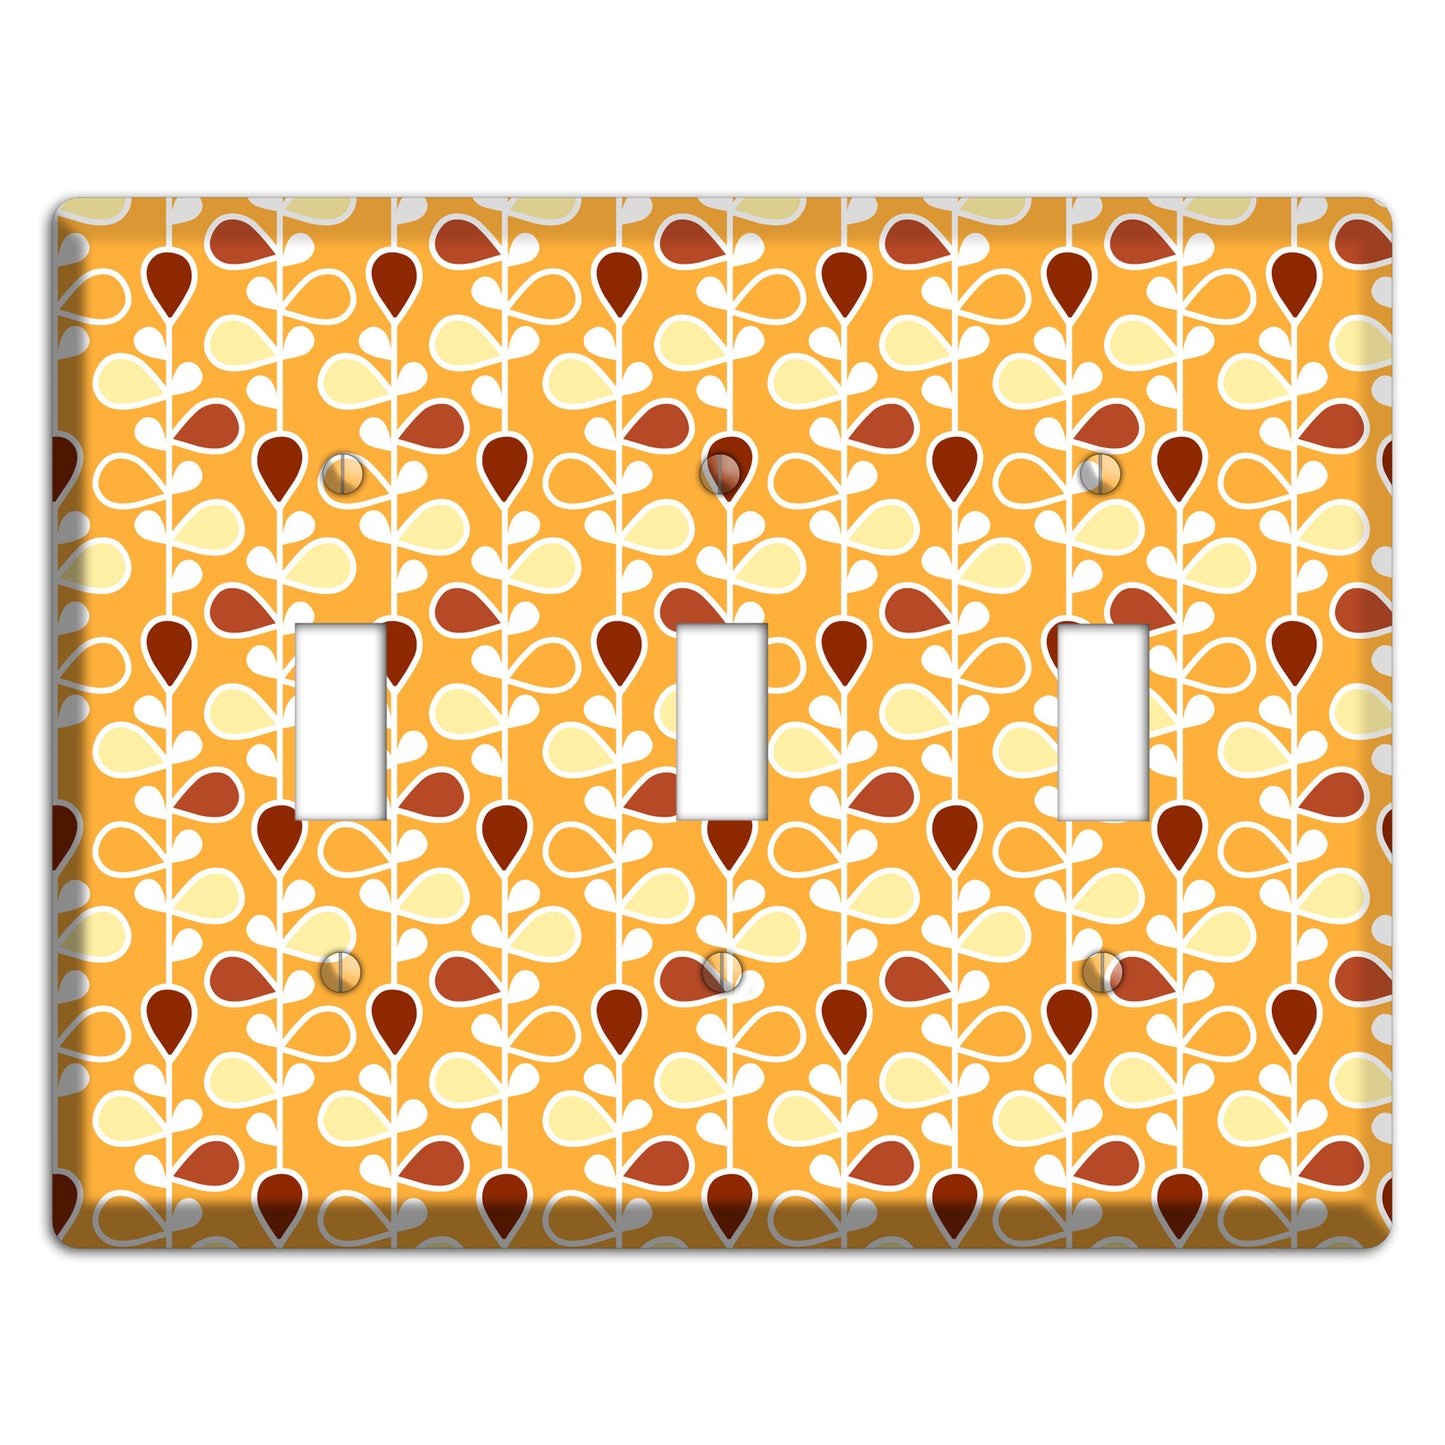 Orange with Yellow and Red Drop and Vine 3 Toggle Wallplate